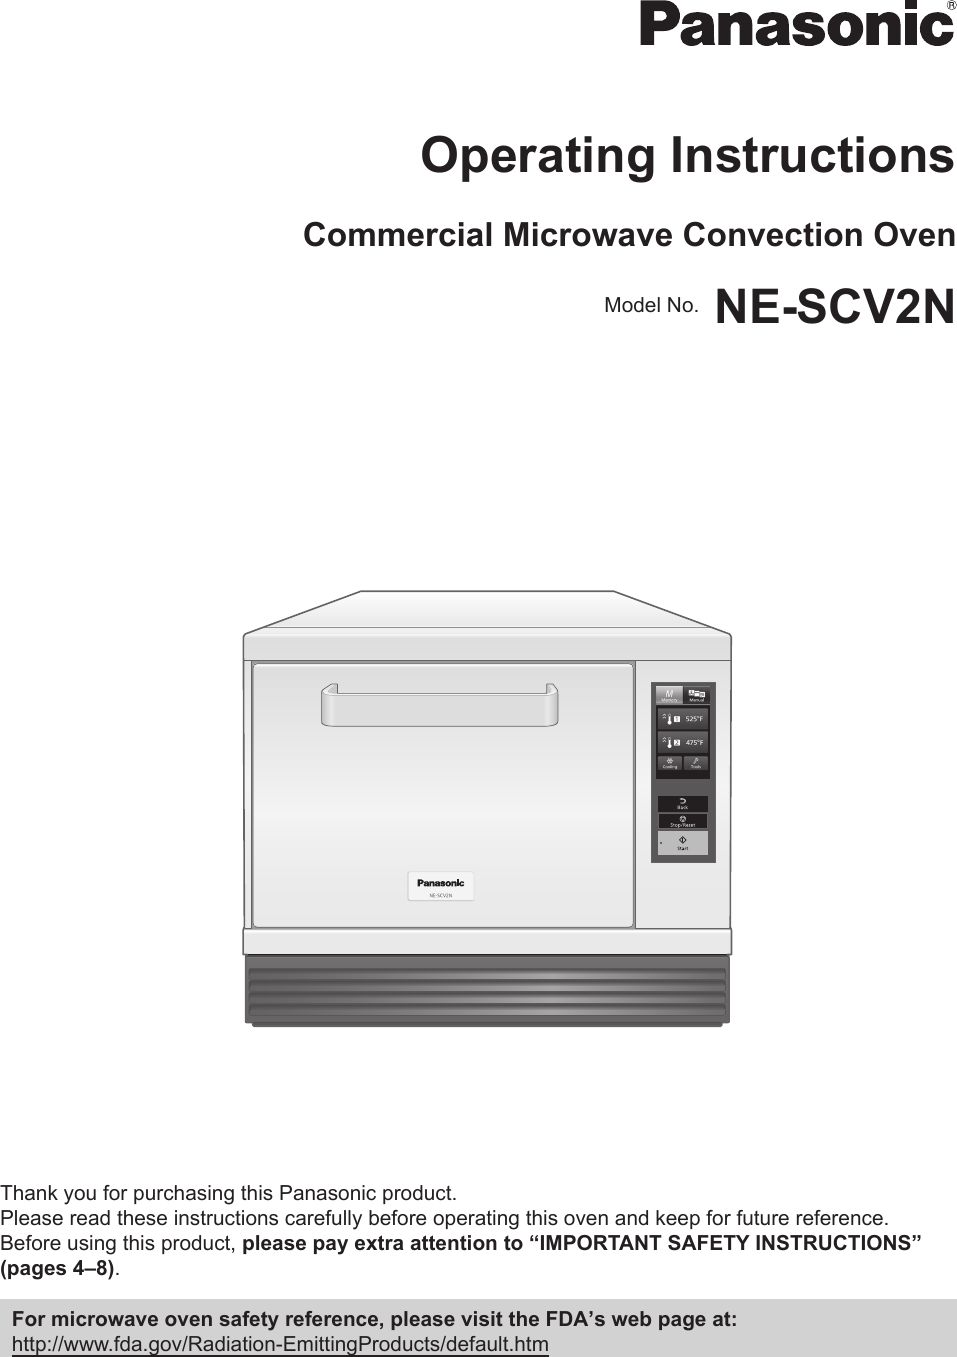 Panasonic convection microwave oven user manual instructions